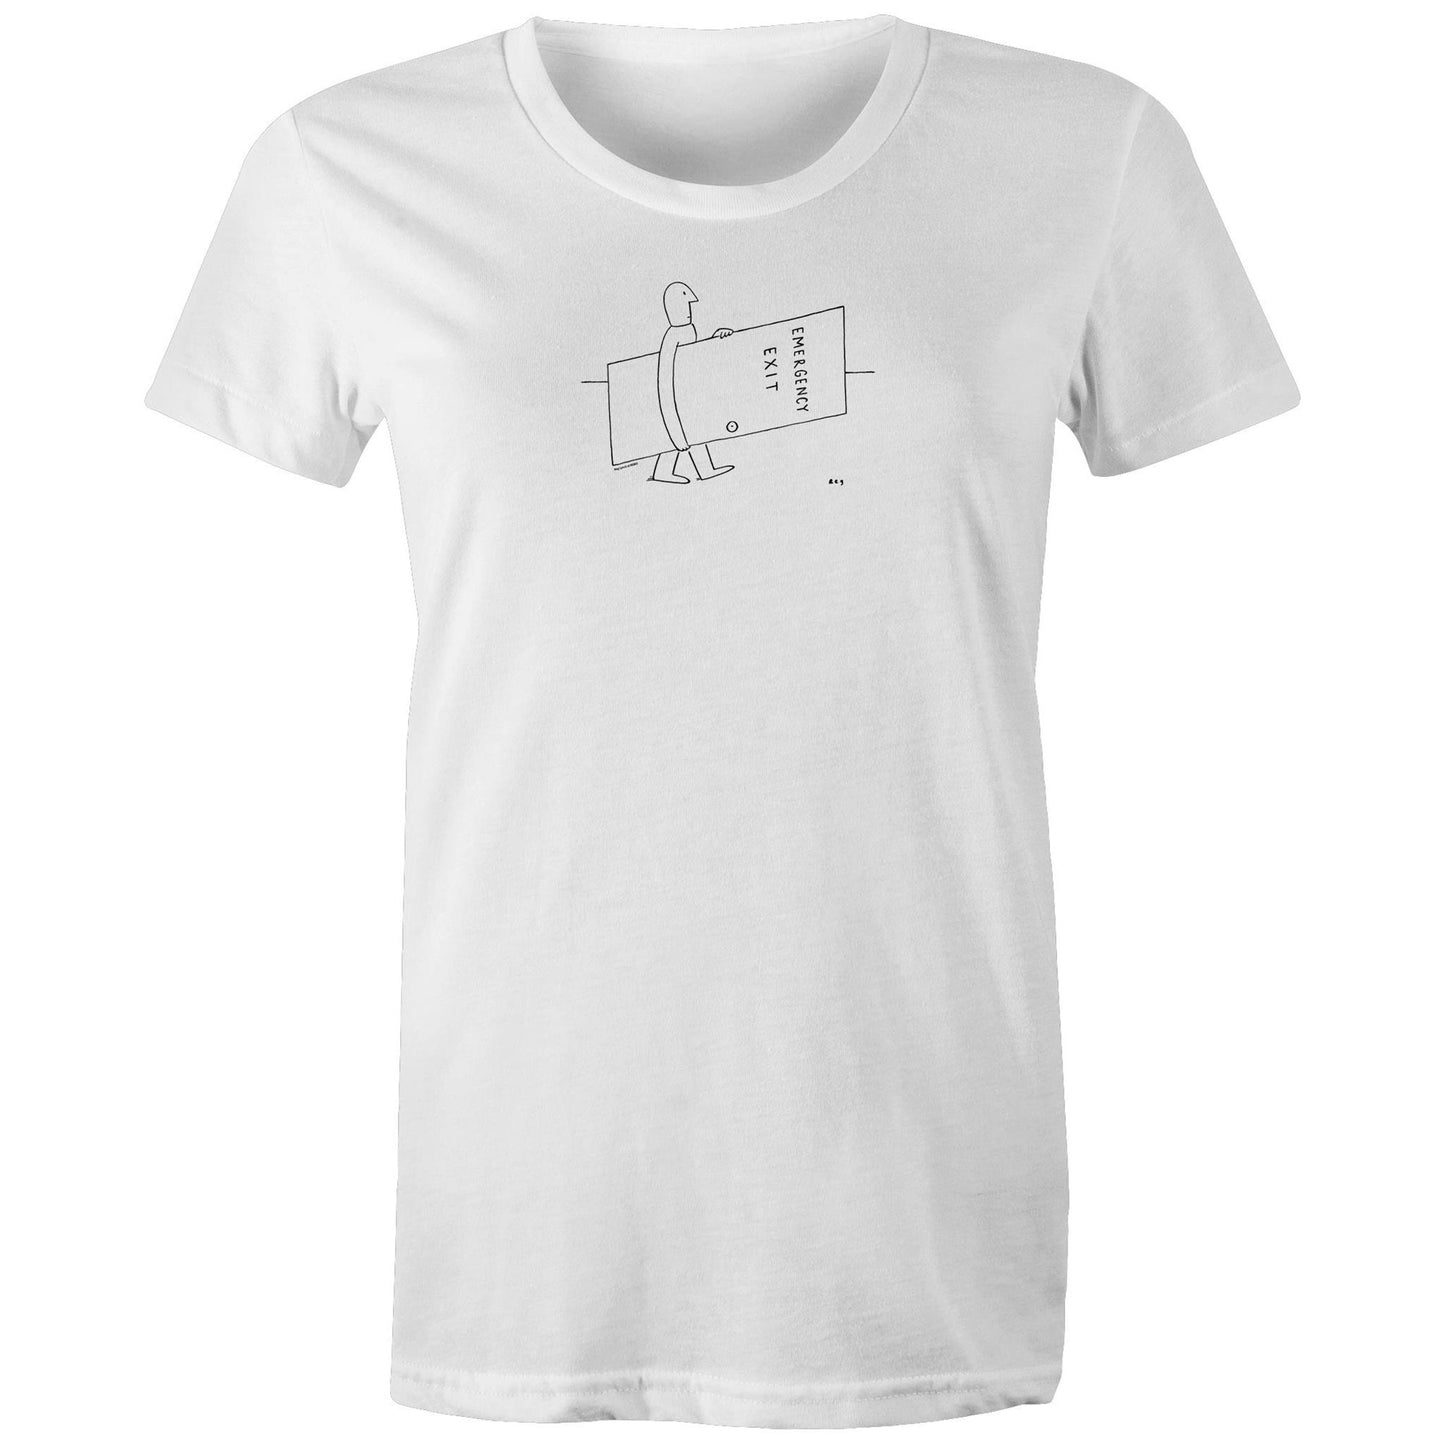 Emergency Exit T Shirts for Women